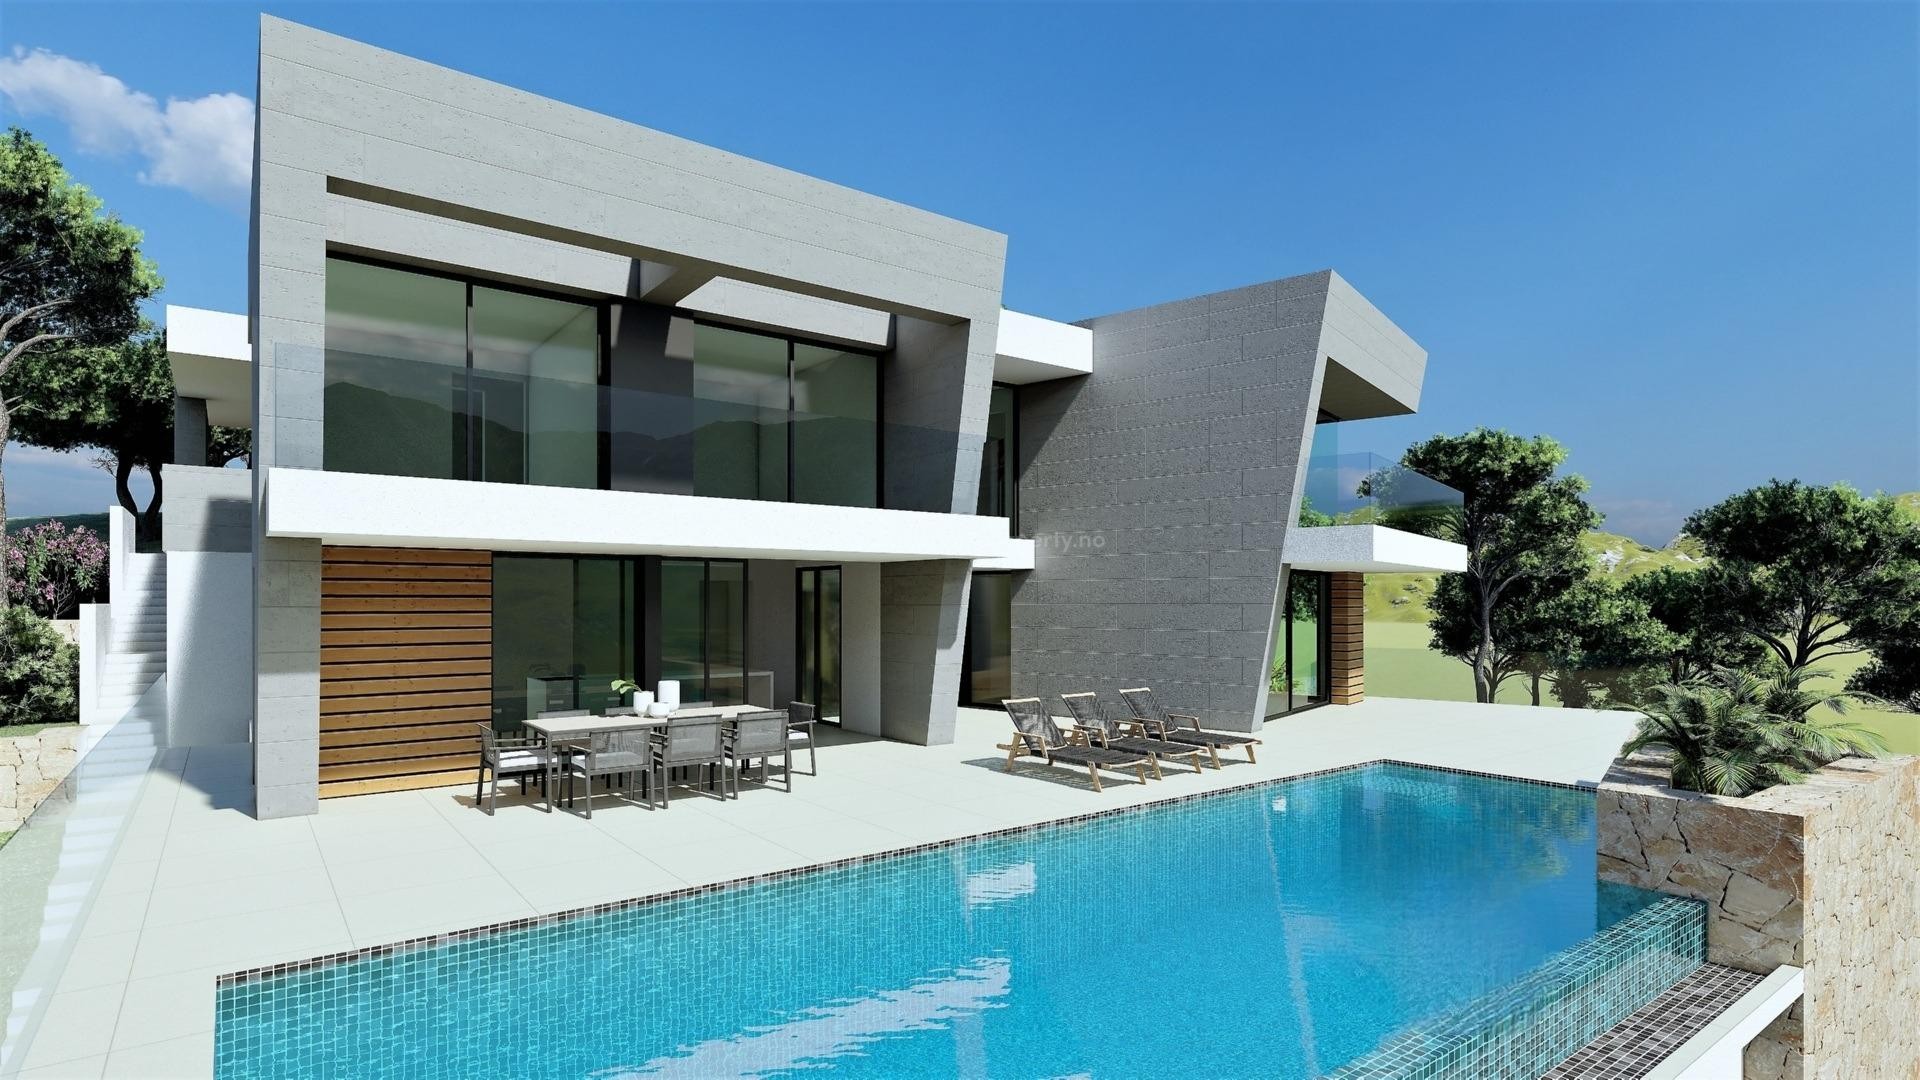 Modern luxury villa in Cumbre del Sol, Benitachell on 3 floors, large infinity pool, 3 bedrooms, 4 bathrooms, one of the best sea views on the Costa Blanca